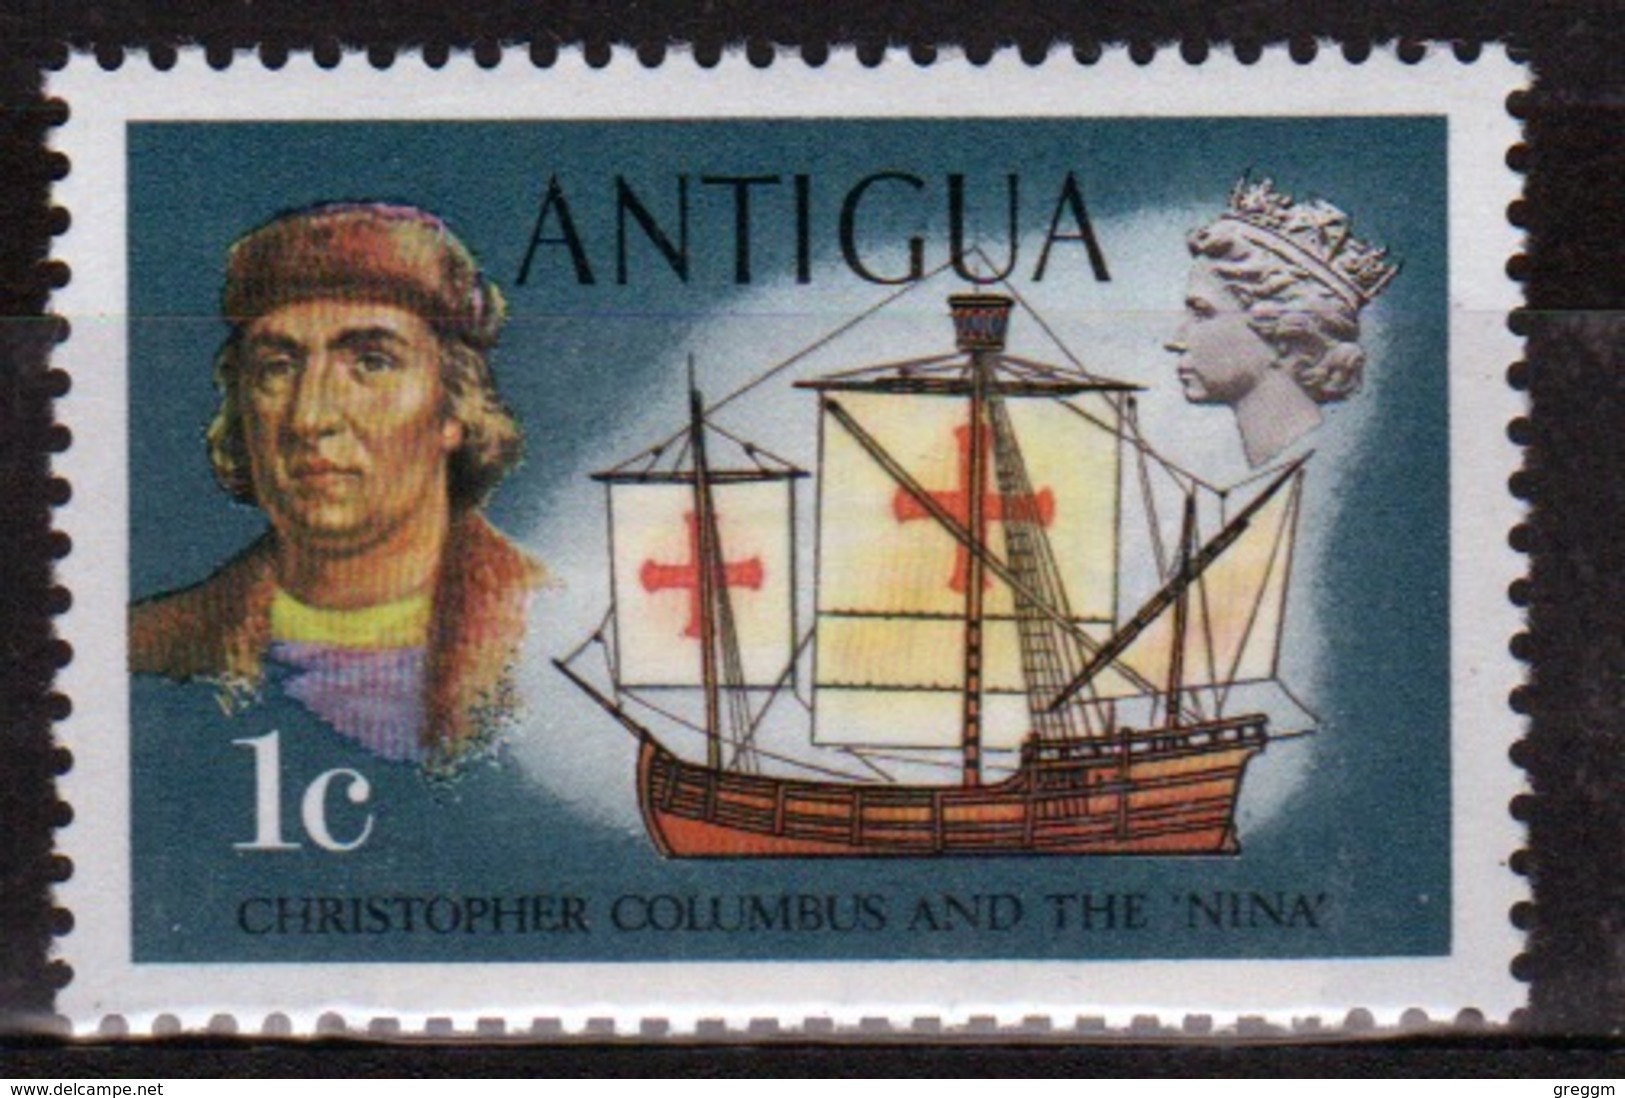 Antigua Single 1 Cent Stamp From The 1970 Definitive Issue Showing Ships. - 1960-1981 Ministerial Government